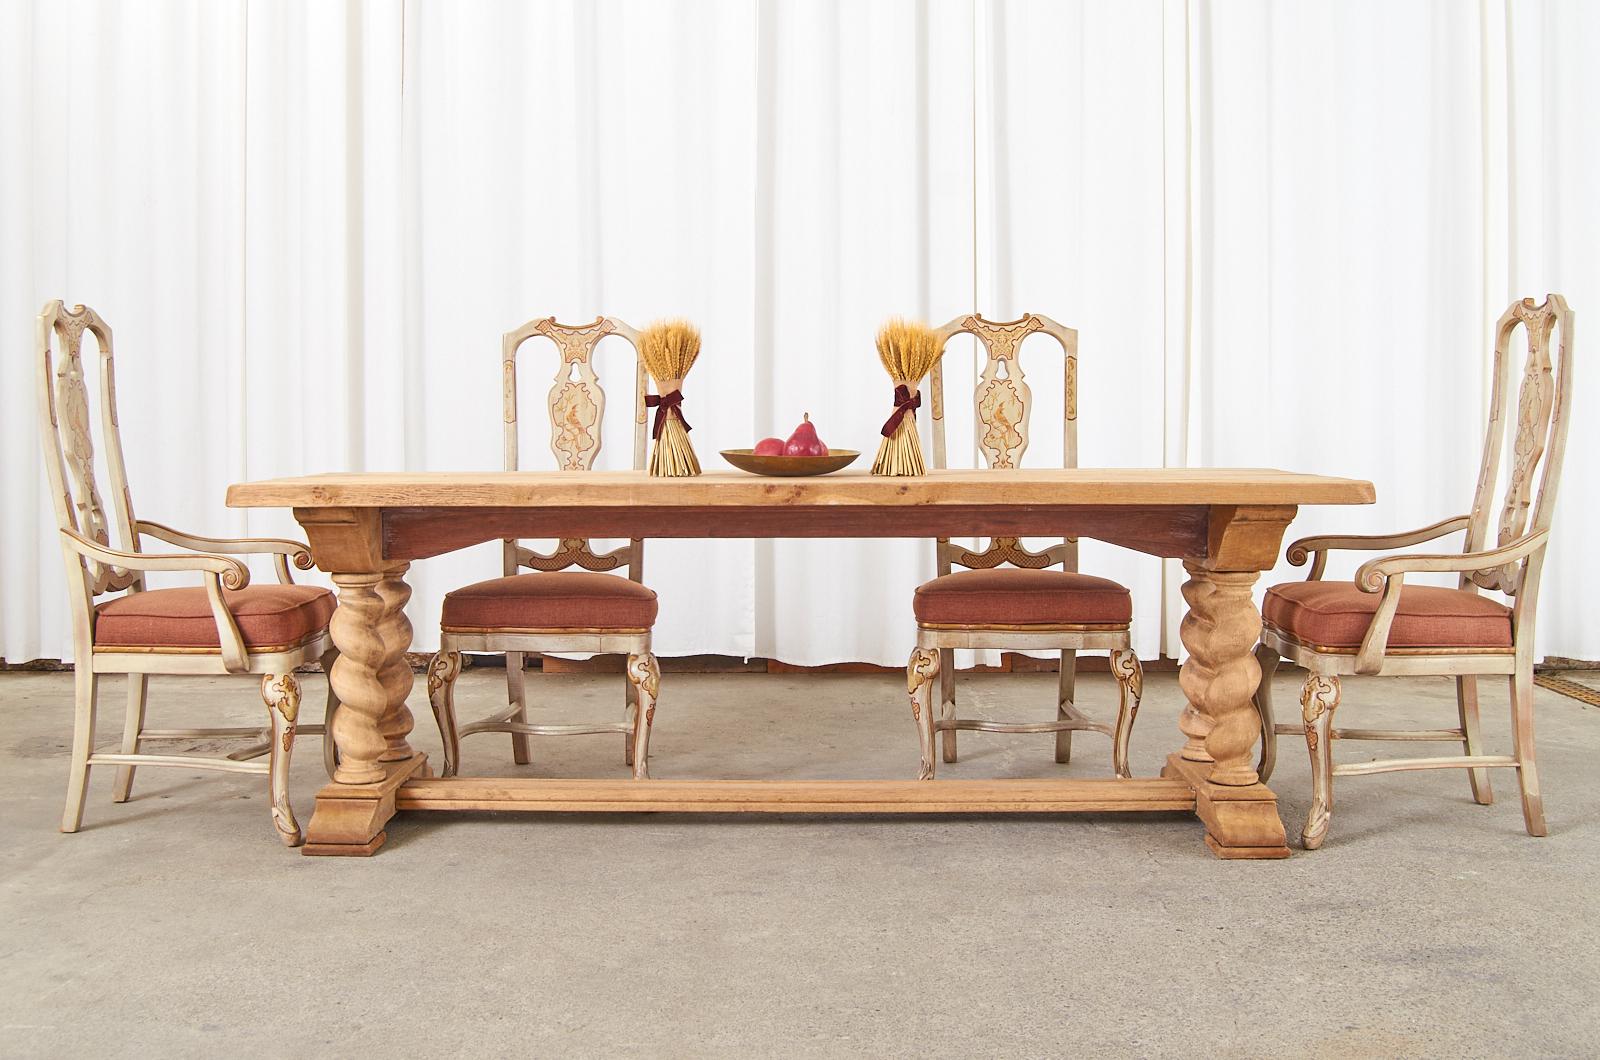 Rustic country French farmhouse trestle dining table crafted from bleached oak. The table features a large trestle base with thick, chunky baroque style barley twist legs ending with shoe feet. The base is topped with a nearly 2 inch thick plank top